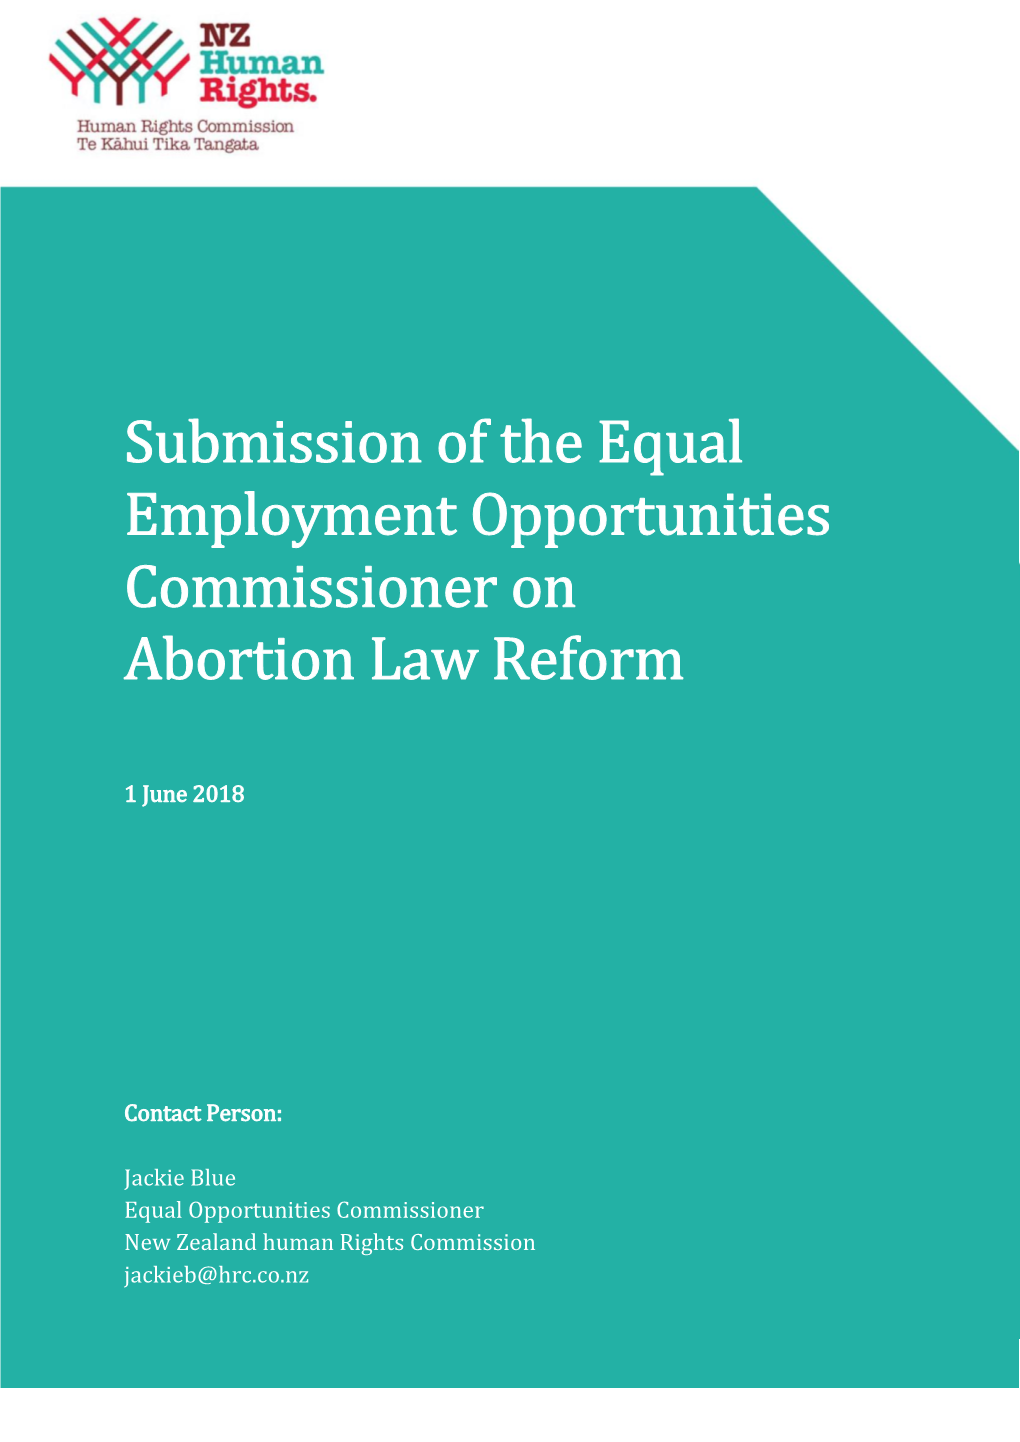 Submission of the Equal Employment Opportunities Commissioner on Abortion Law Reform